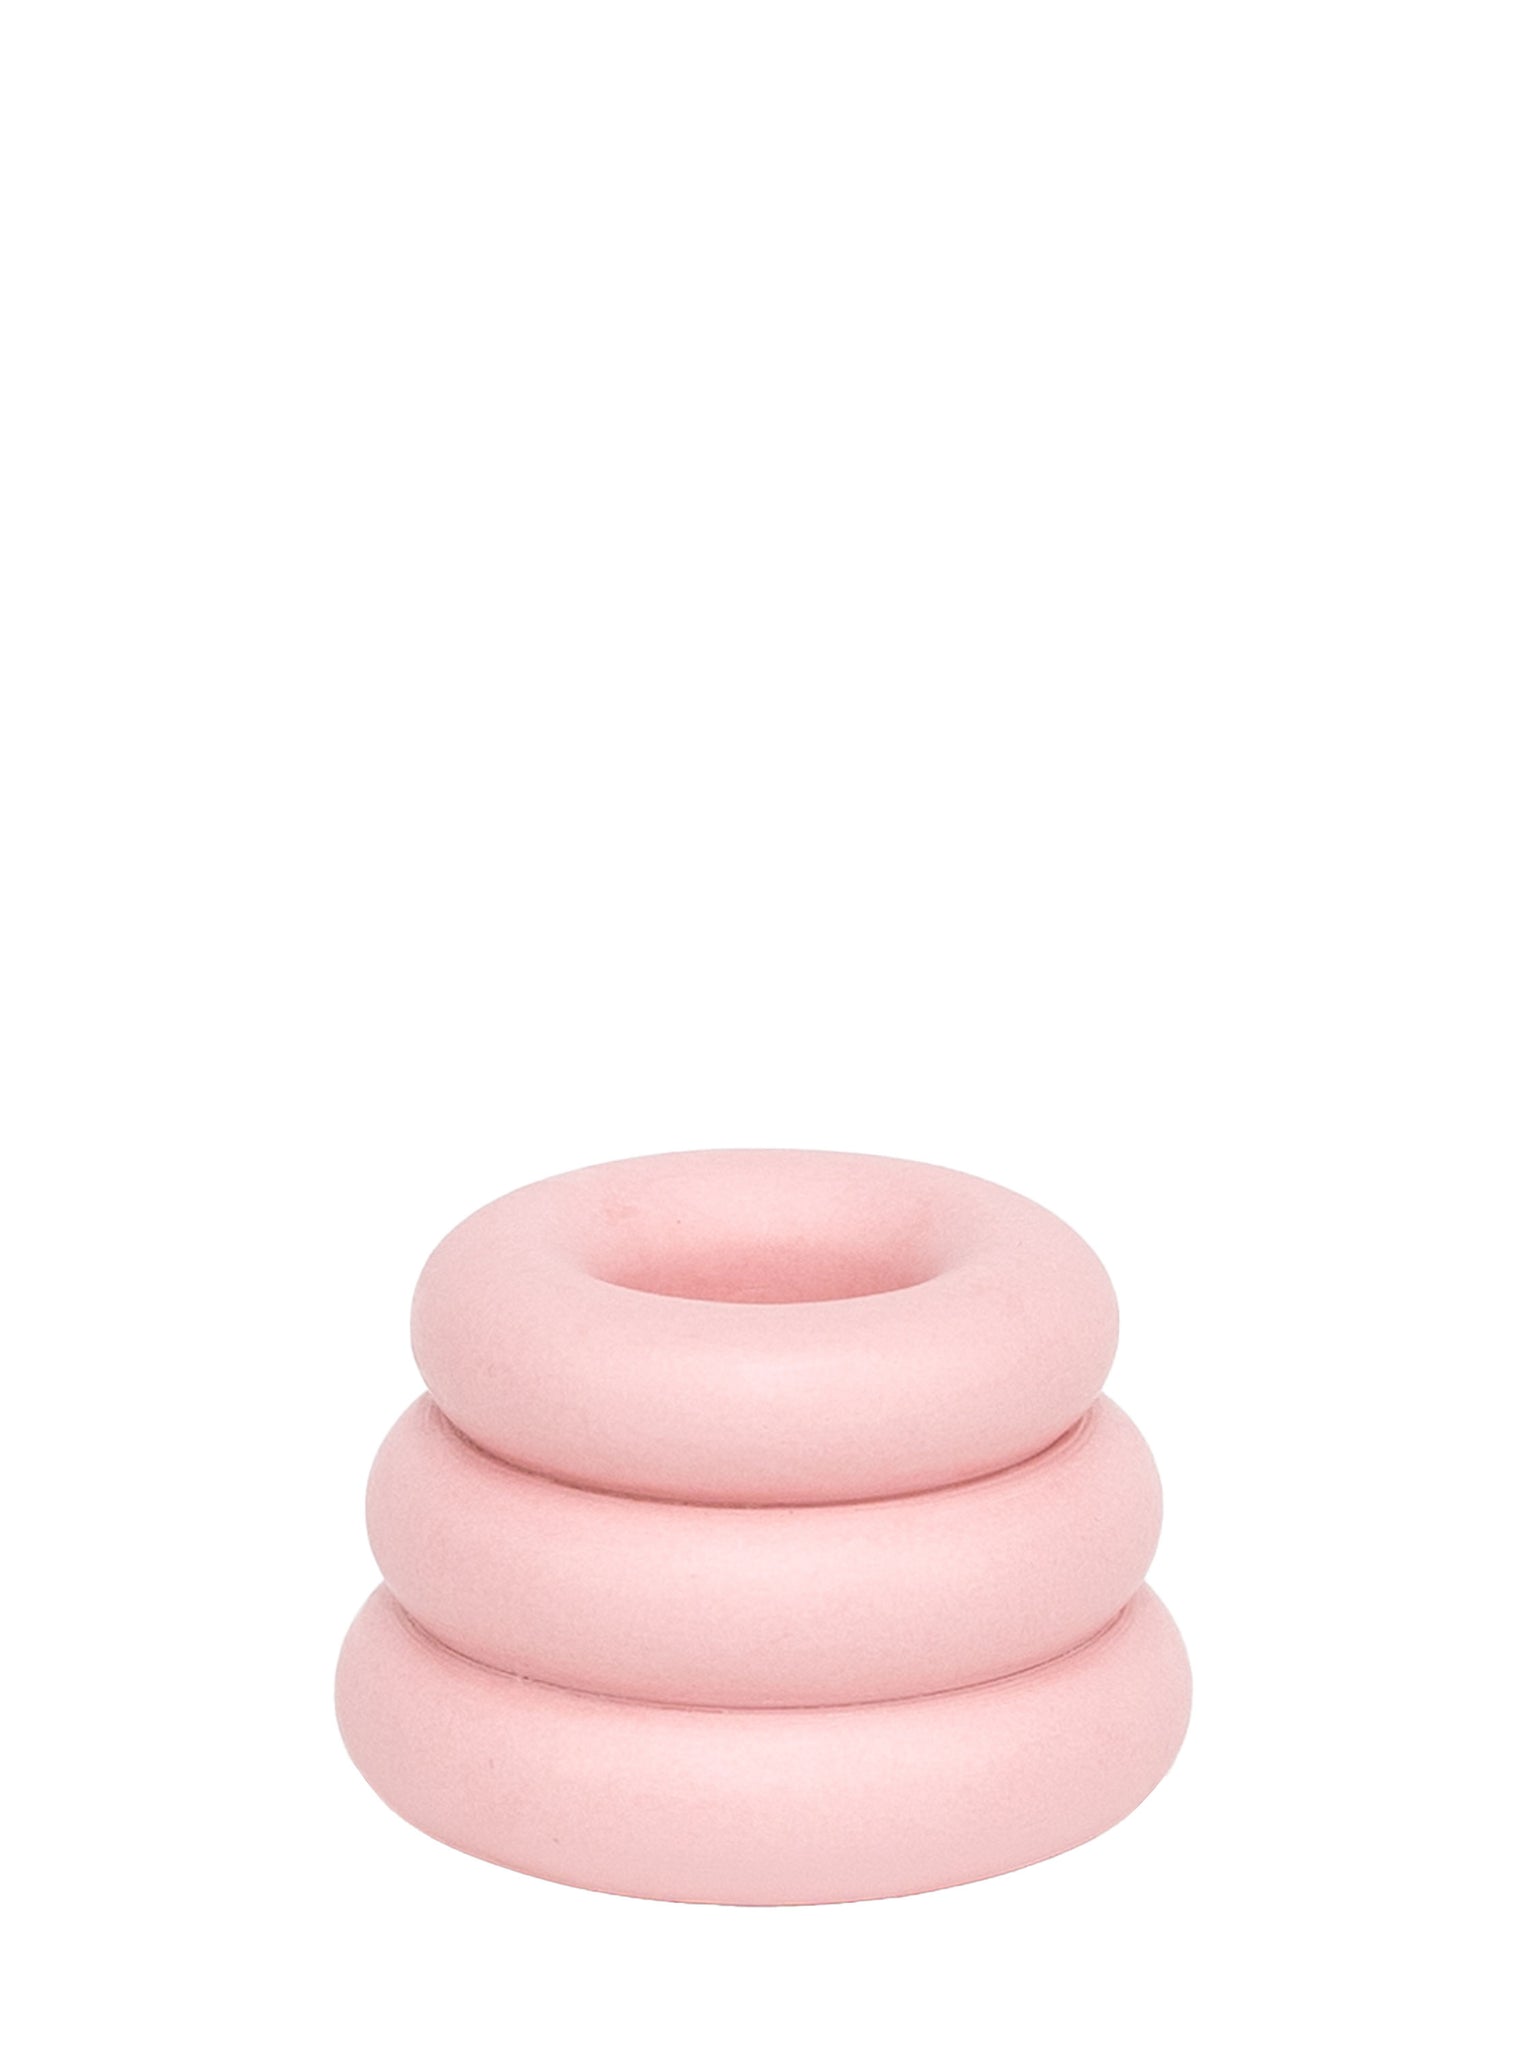 pink Jesmonite Candleholder by Yod and Co